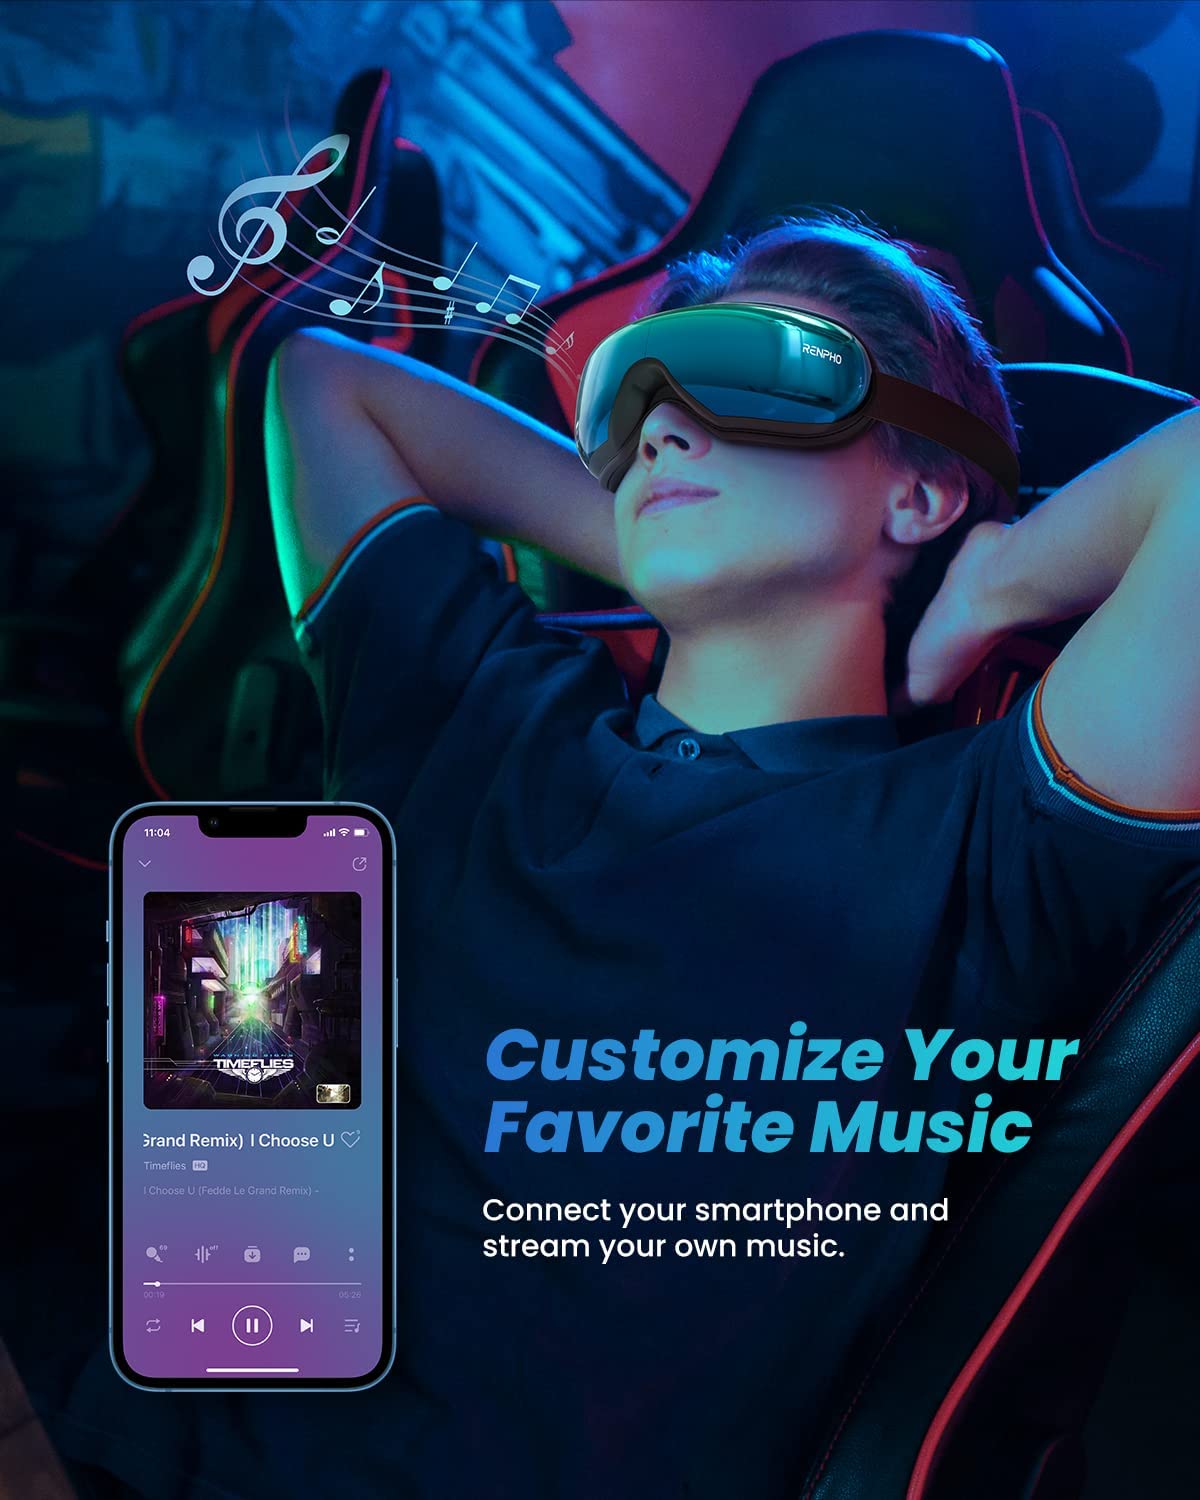 A person relaxes in a chair, wearing Renpho EU's Eyeris 1 Eye Massager - Silver Teal and headphones equipped with an eye massager, immersed in music. A smartphone displays a music app interface. Neon lights provide a vibrant backdrop.